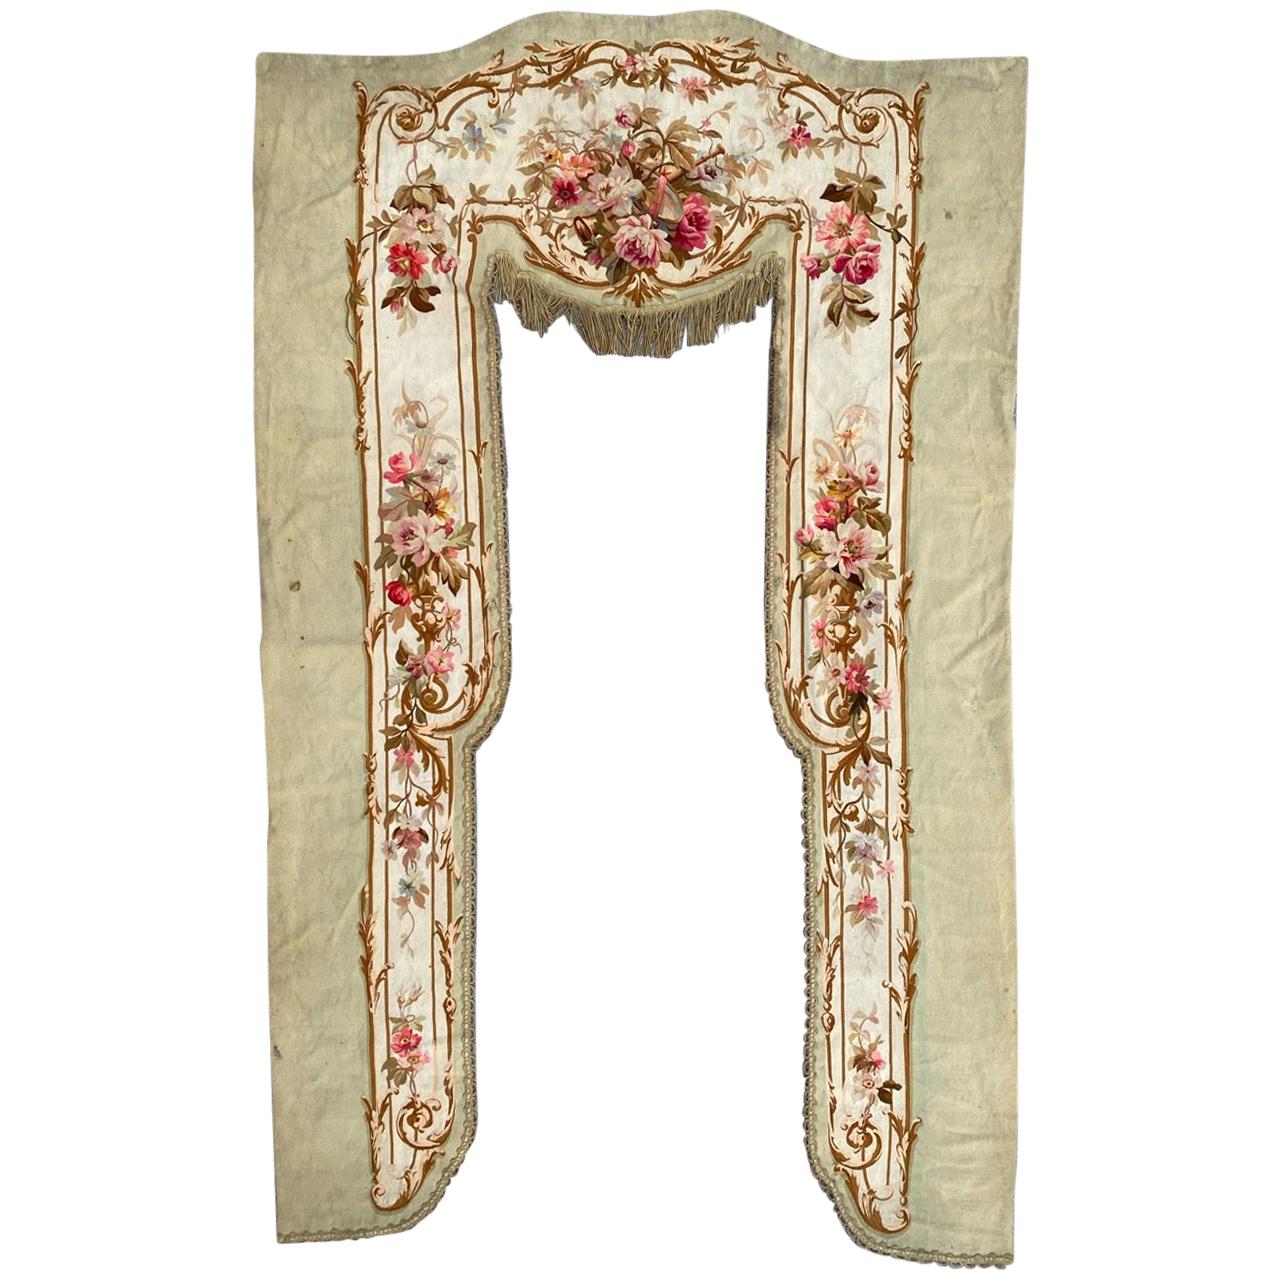 Wonderful French Valance Aubusson Tapestry